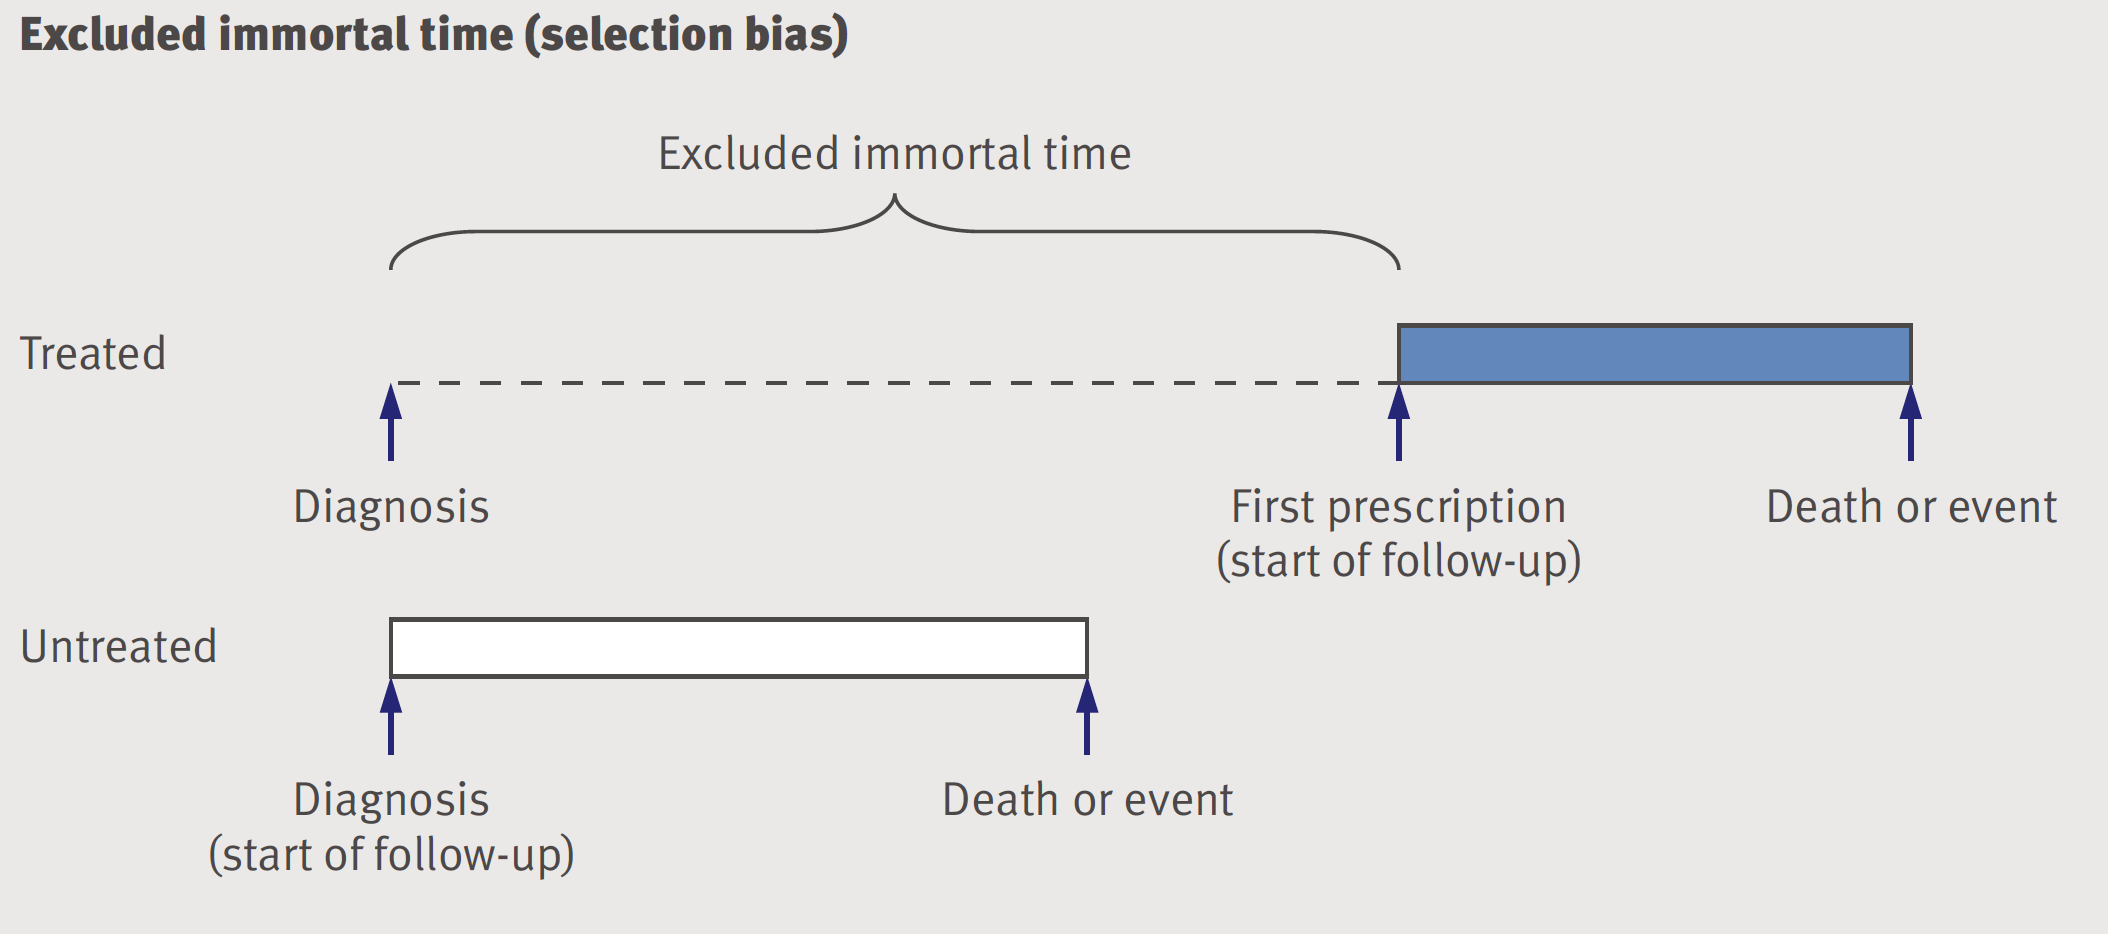 Excluded immortal time -selection bias